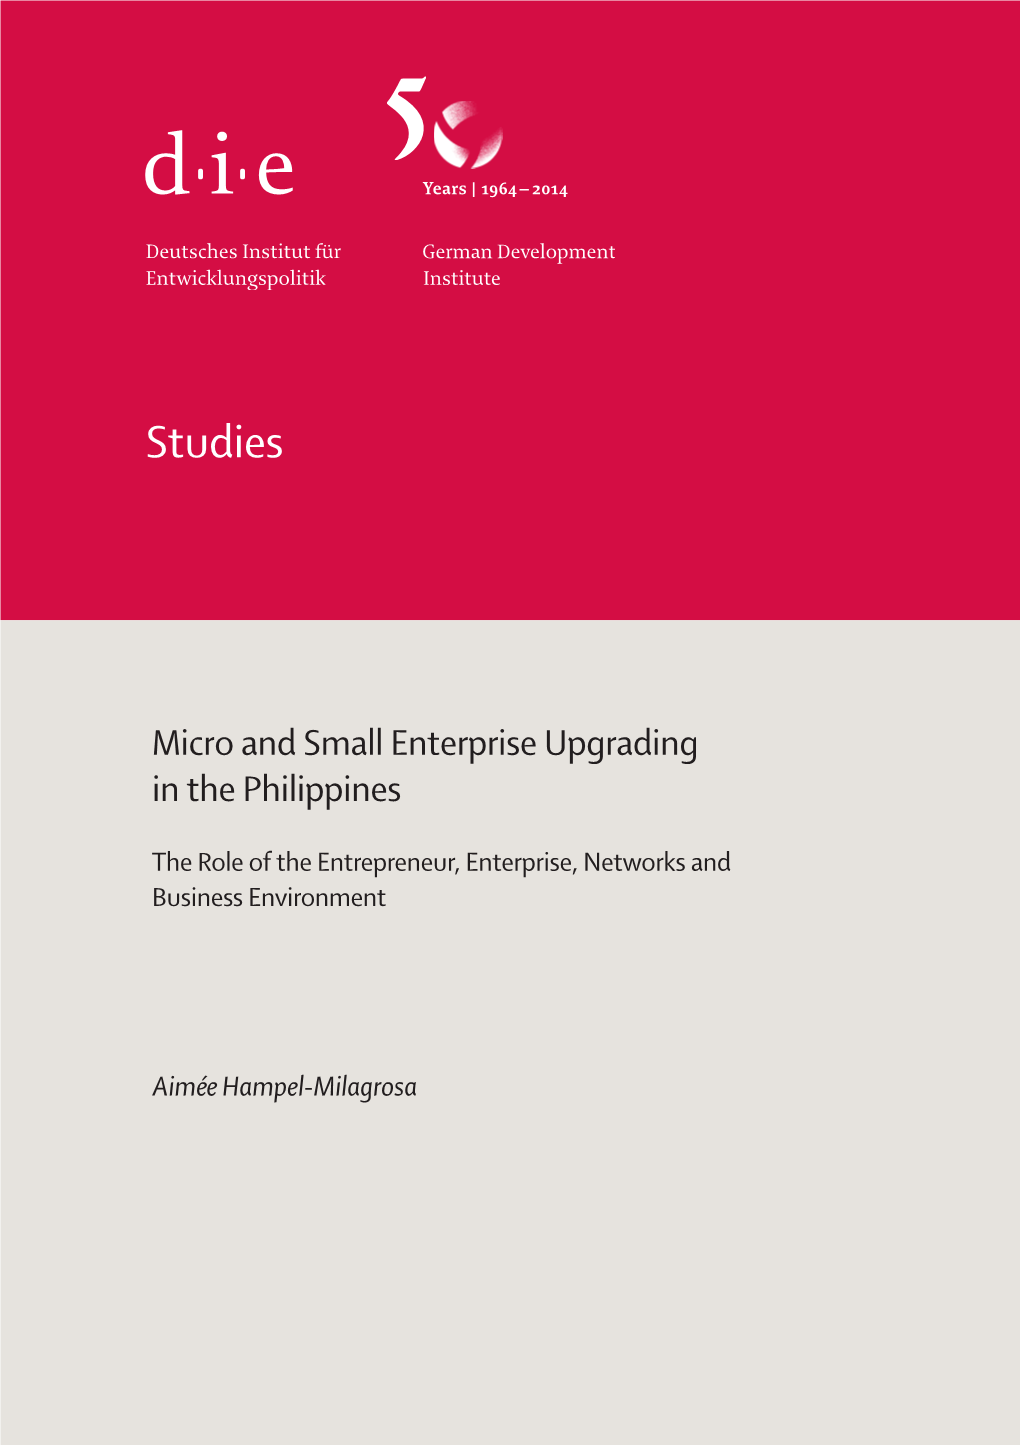 Micro and Small Enterprise Upgrading in the Philippines